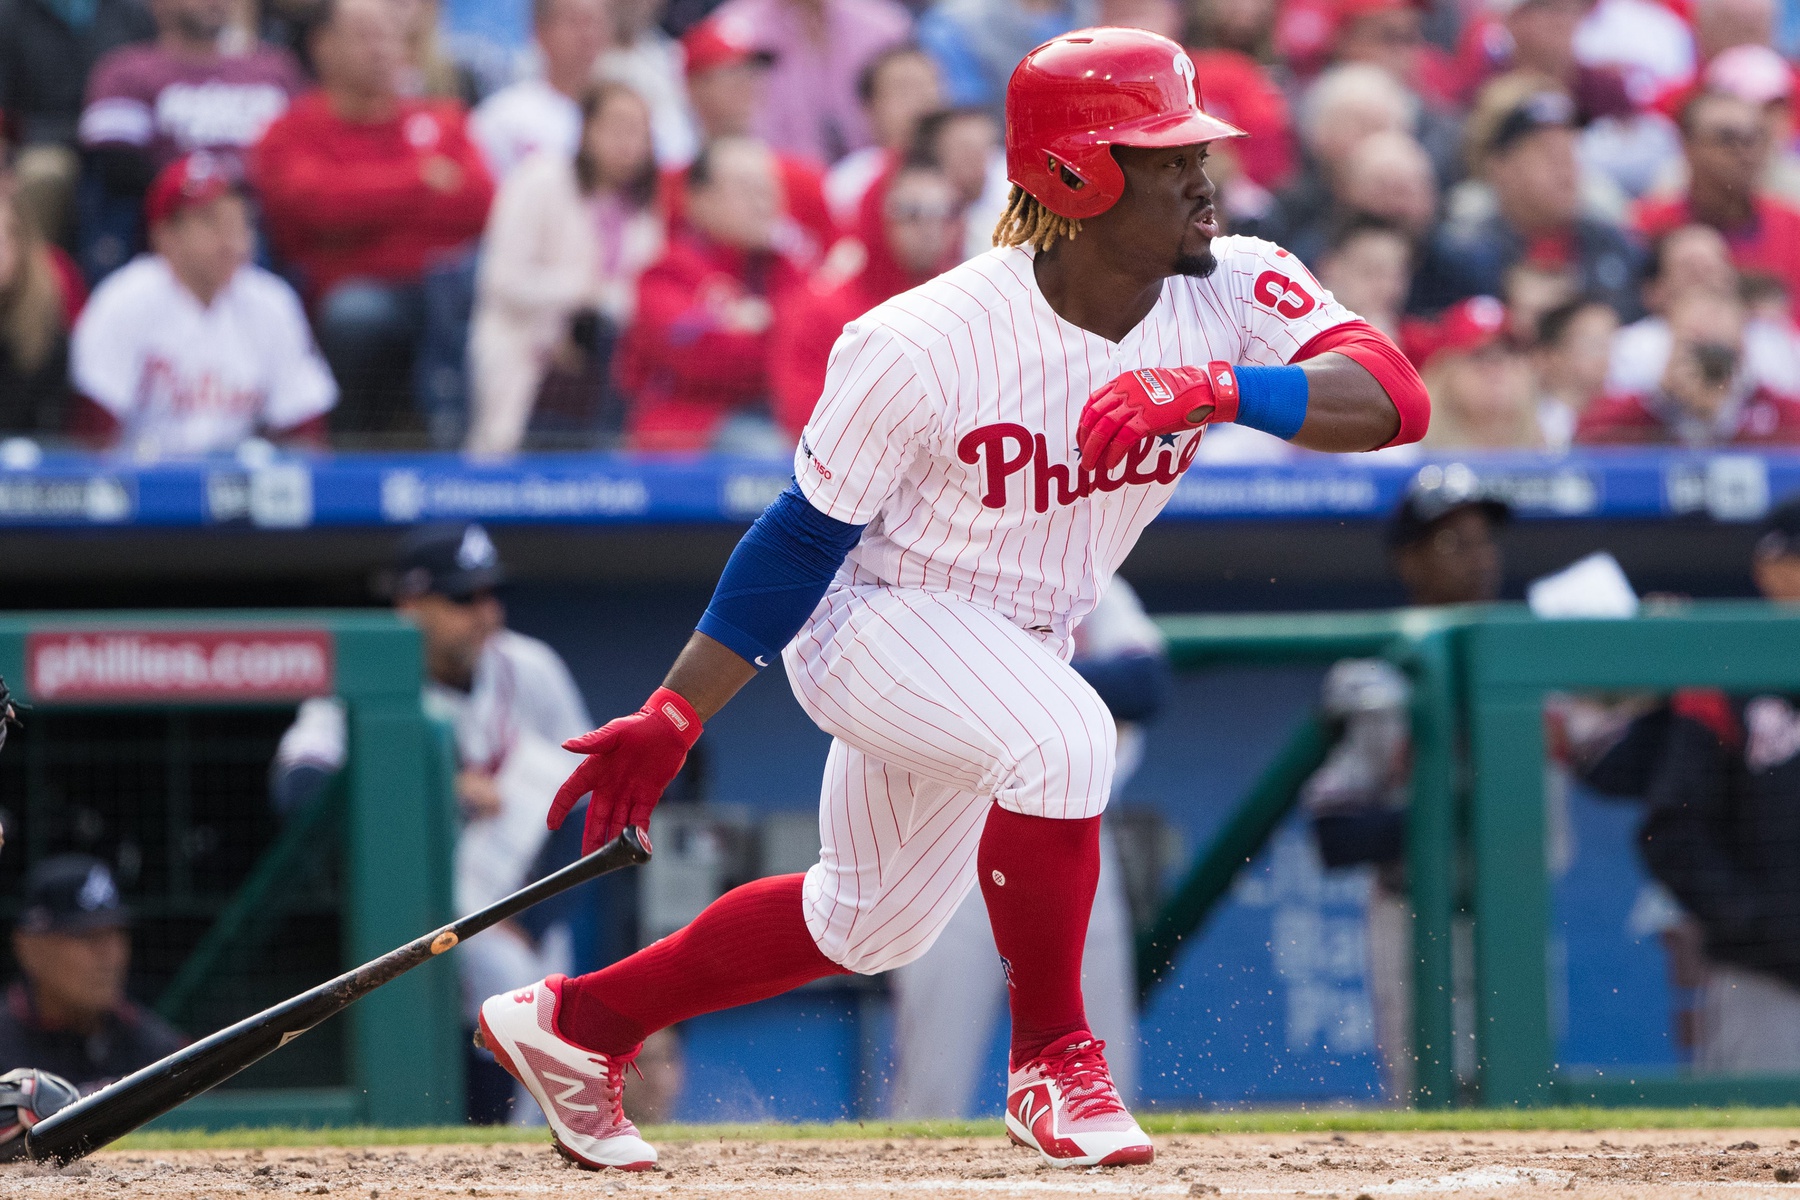 Odubel Hererra’s Future? Phillies are “Discussing that Internally”